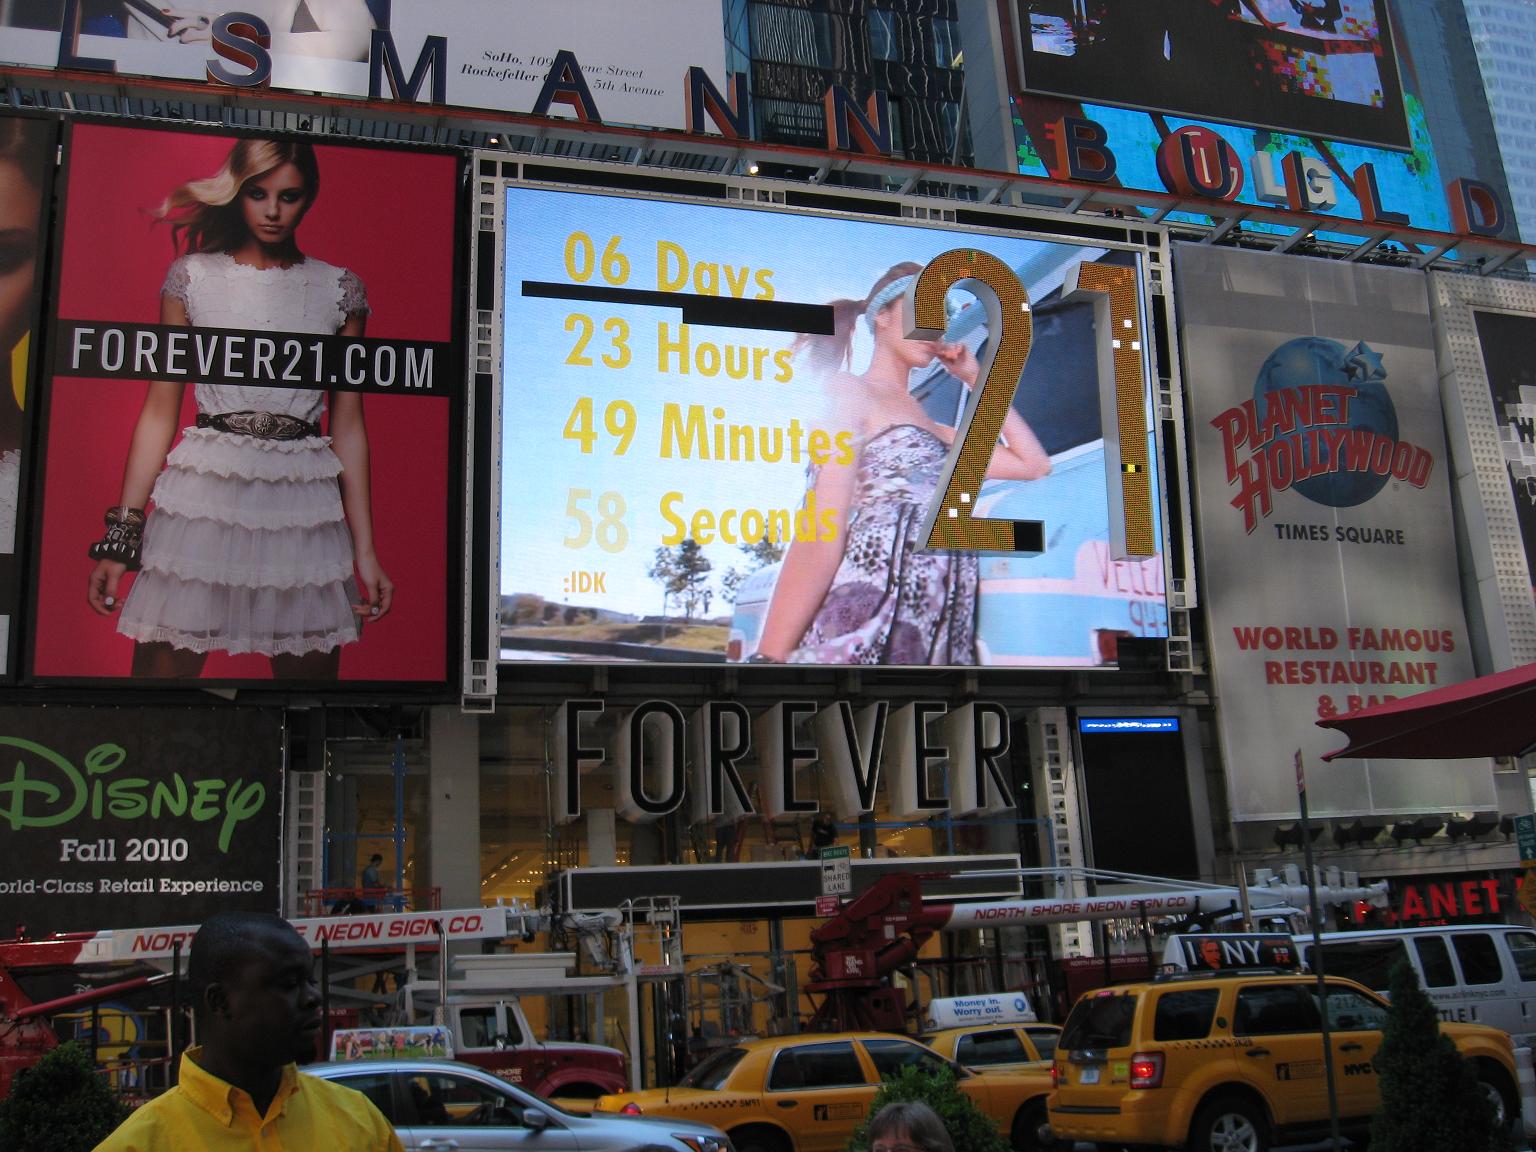 Countdown to Forever 21â€™s Times Square Superstore